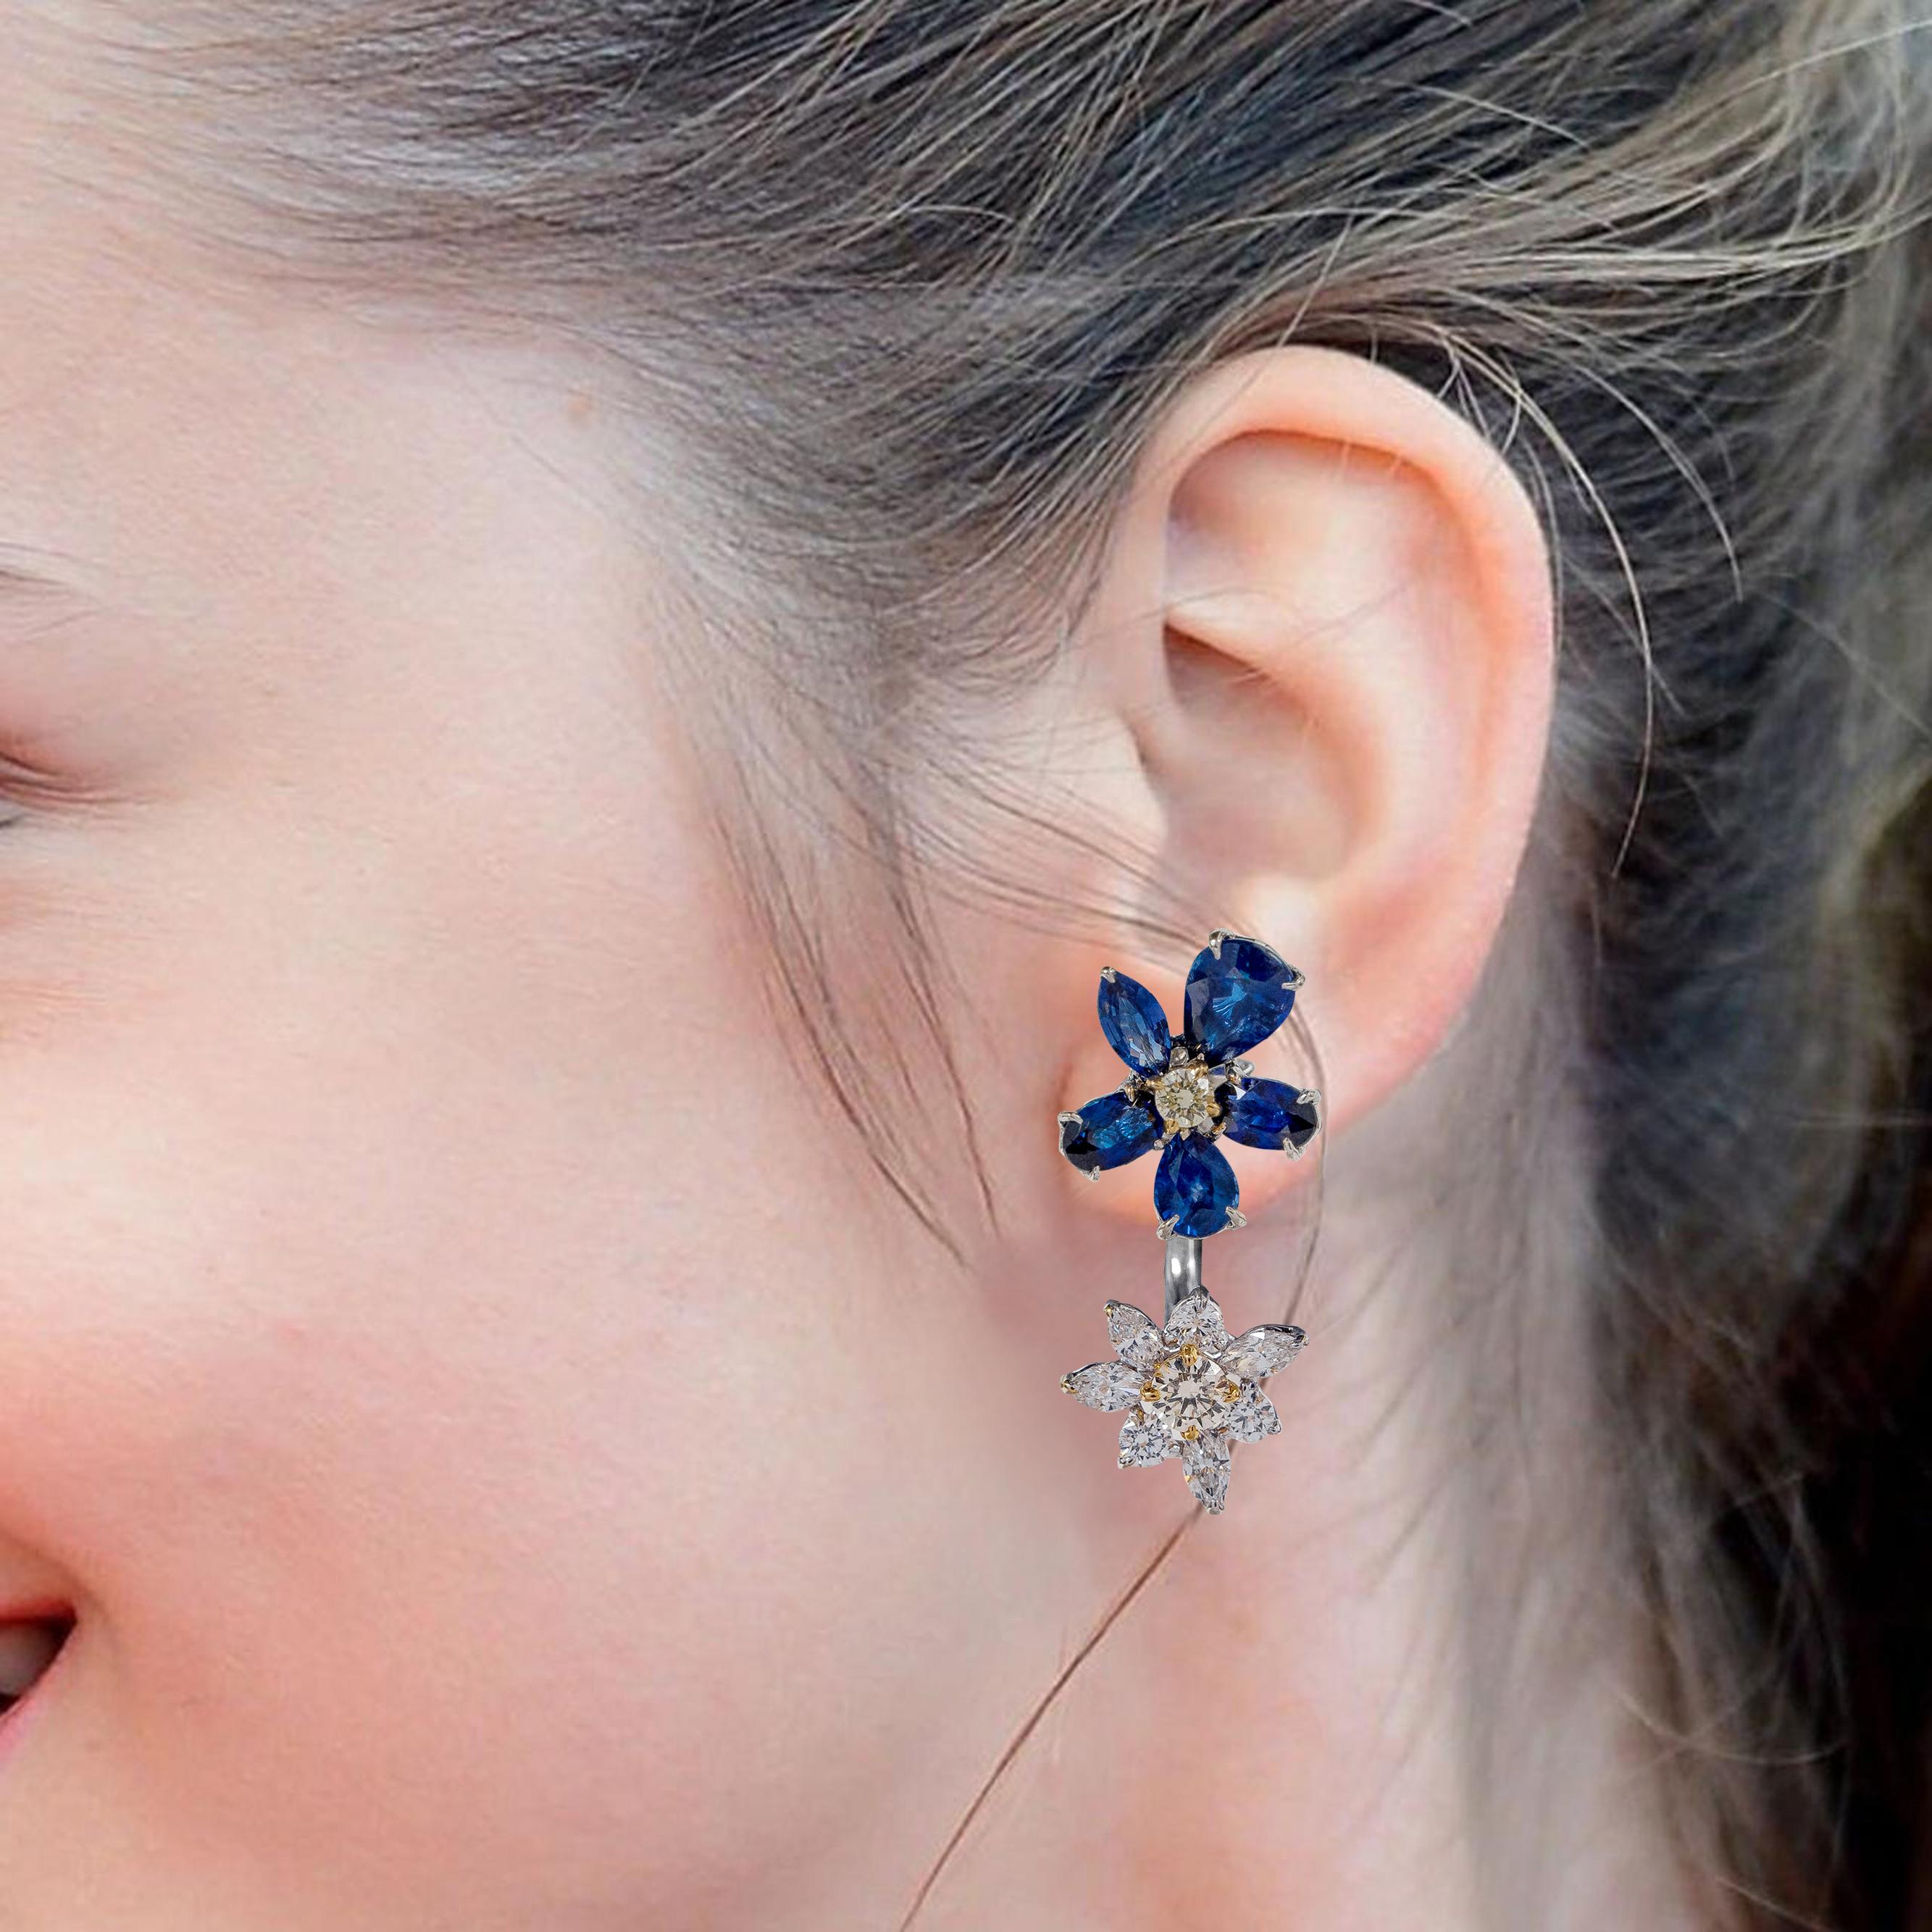 18 Karat White Gold Blue Sapphire, White, and Yellow Diamond Stud Earrings

This impressive double-floral midnight blue sapphire and diamond earring pair is graphically pleasing. The mix of shape and cuts of vivid blue sapphires form the petals of